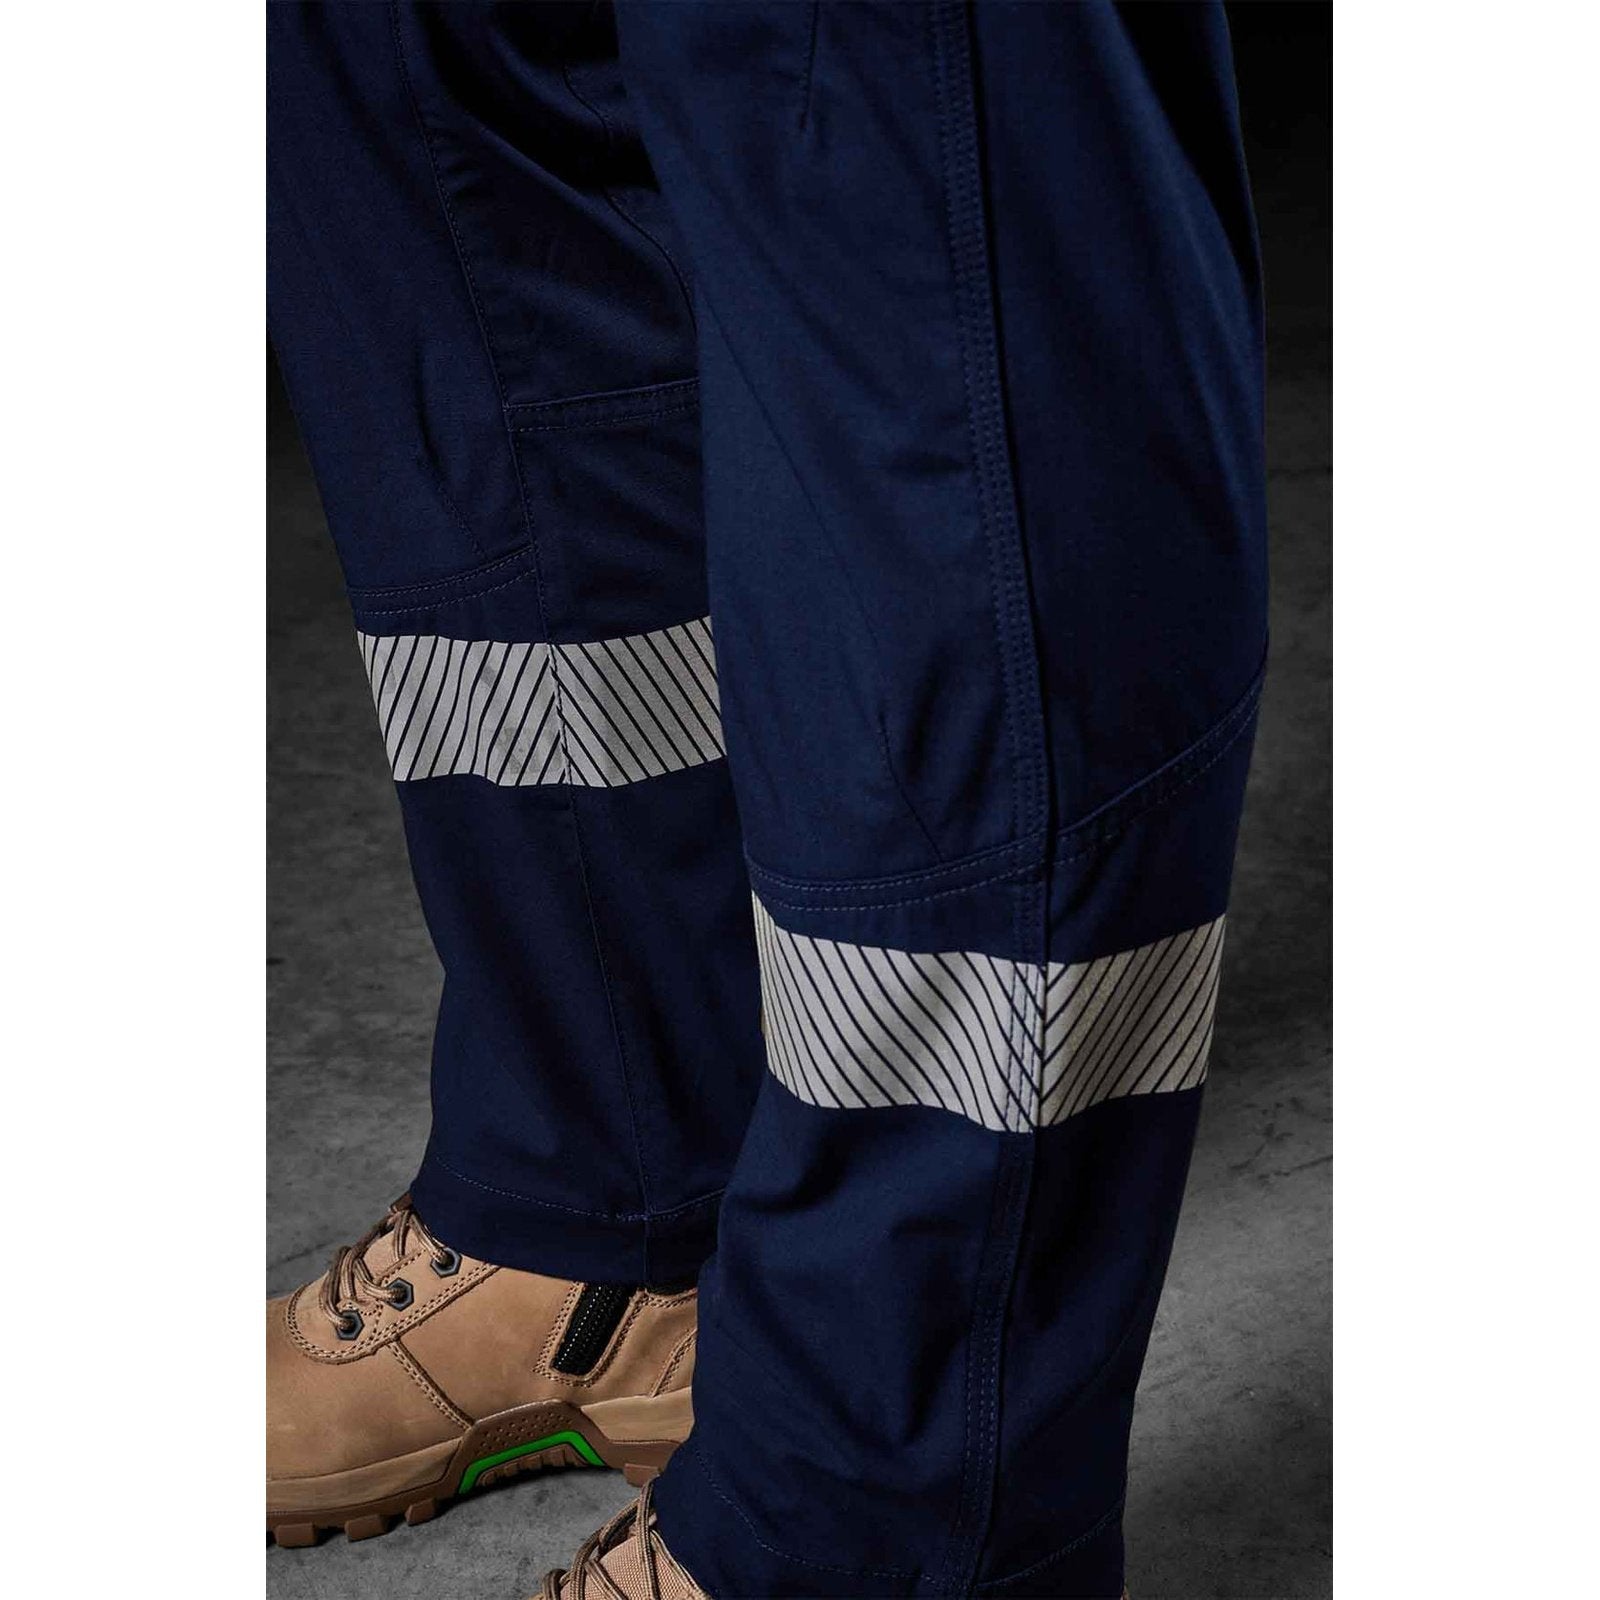 FXD Women's Taped Stretch Ripstop Work Pants - WP-7WT | Womens Workwear